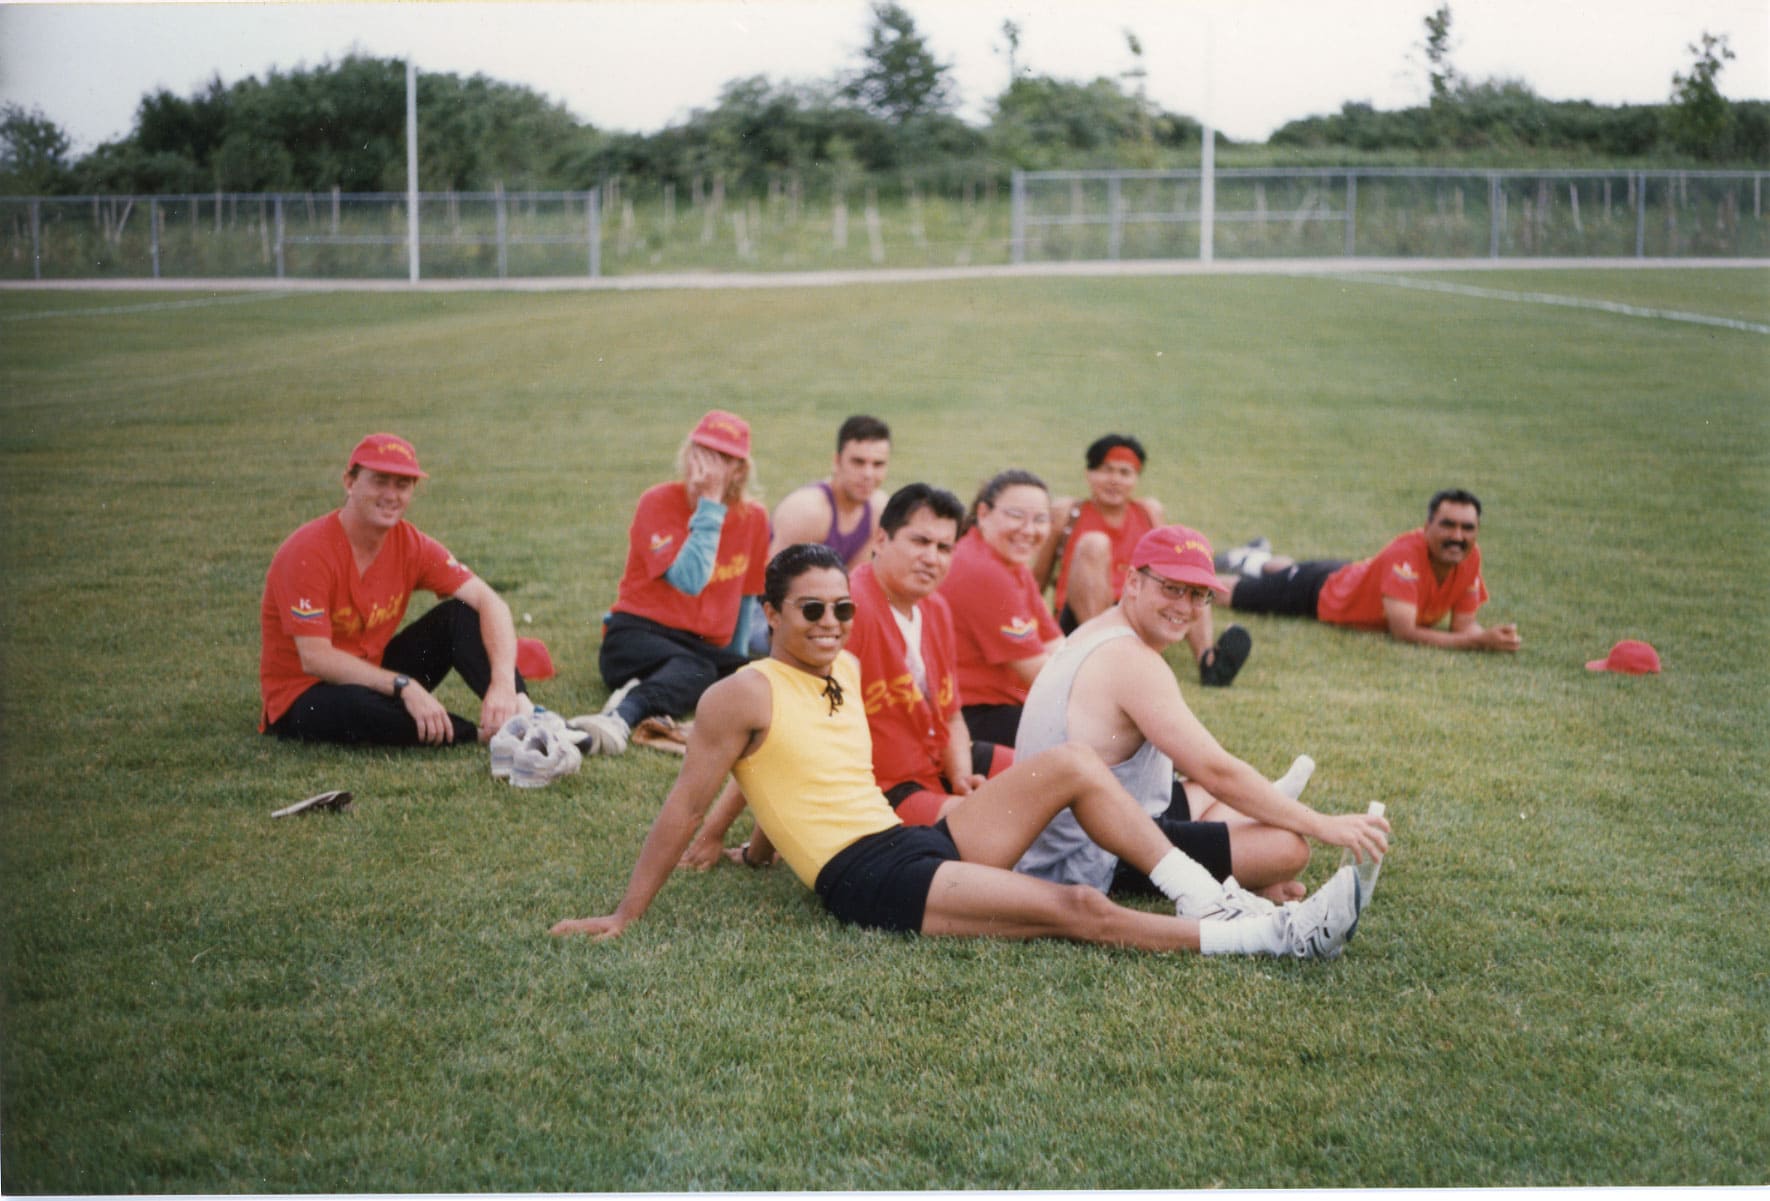 9 people lounge on the grass smiling, most in red jerseys